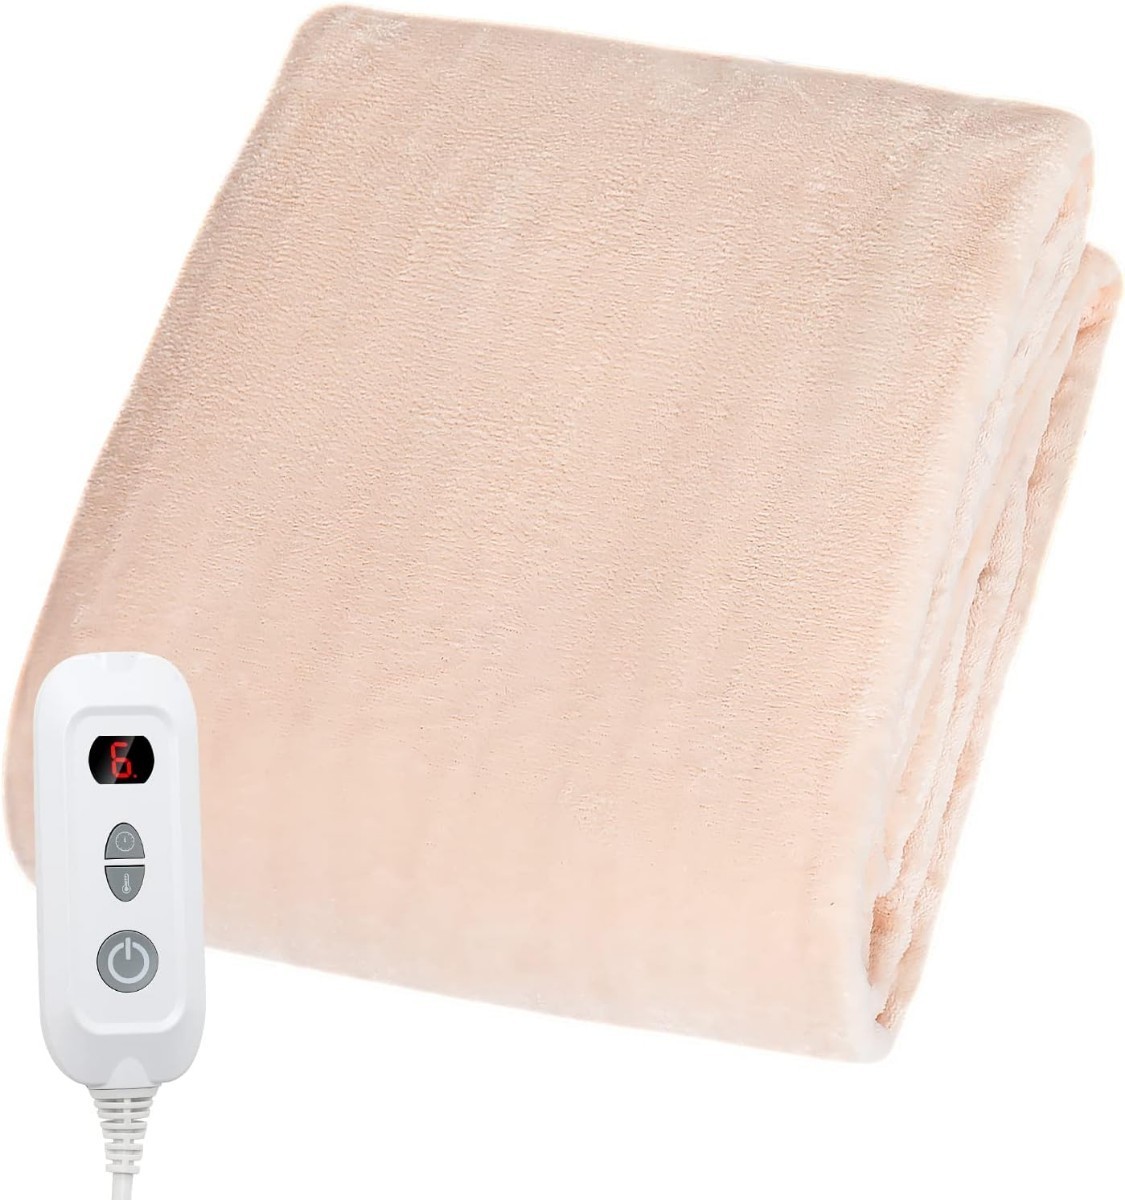  electric 188cm×130cm 10 minute speed .6 -step temperature adjustment & timer possible ... flannel energy conservation mites .. soft uniformity heating cold measures bedding PSE certification settled 